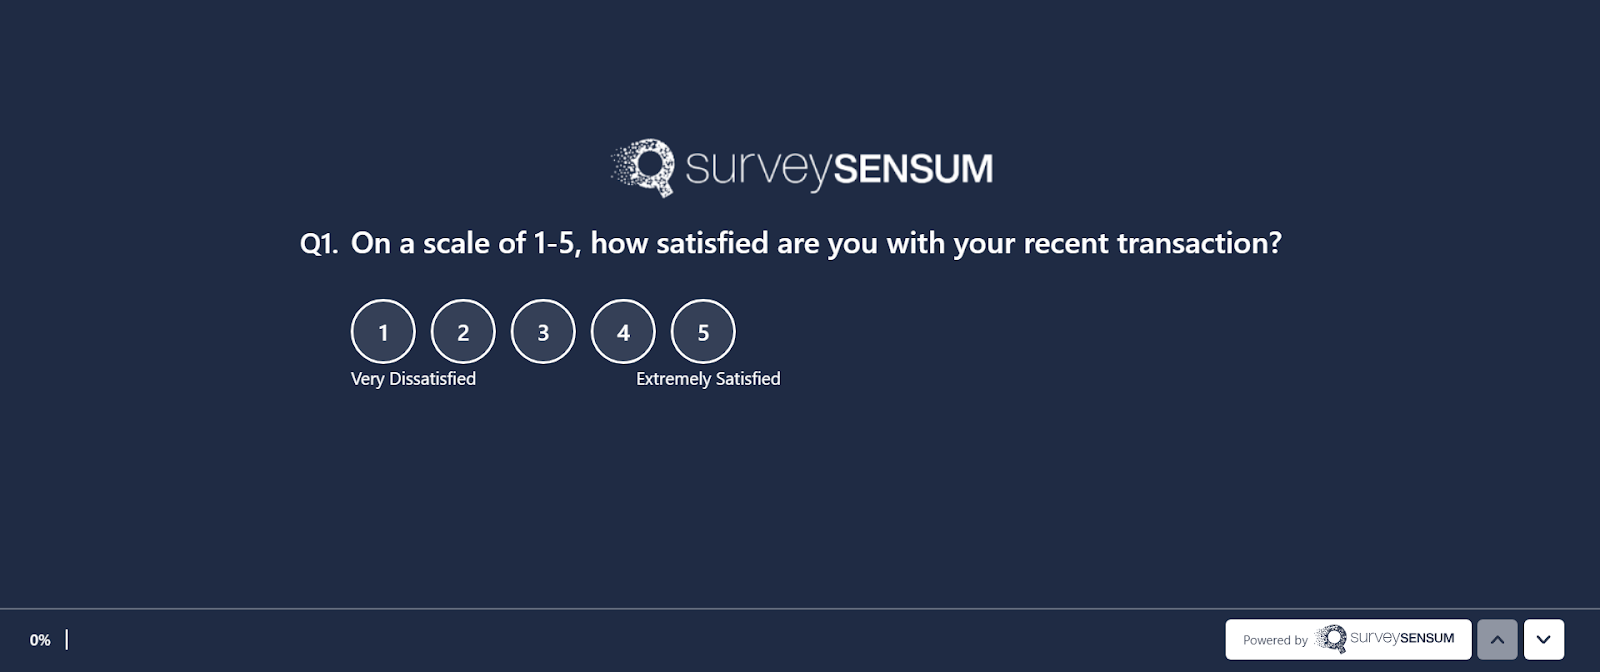 This is the screenshot of a post-transaction survey where the question asked how satisfied are you with your recent transaction?